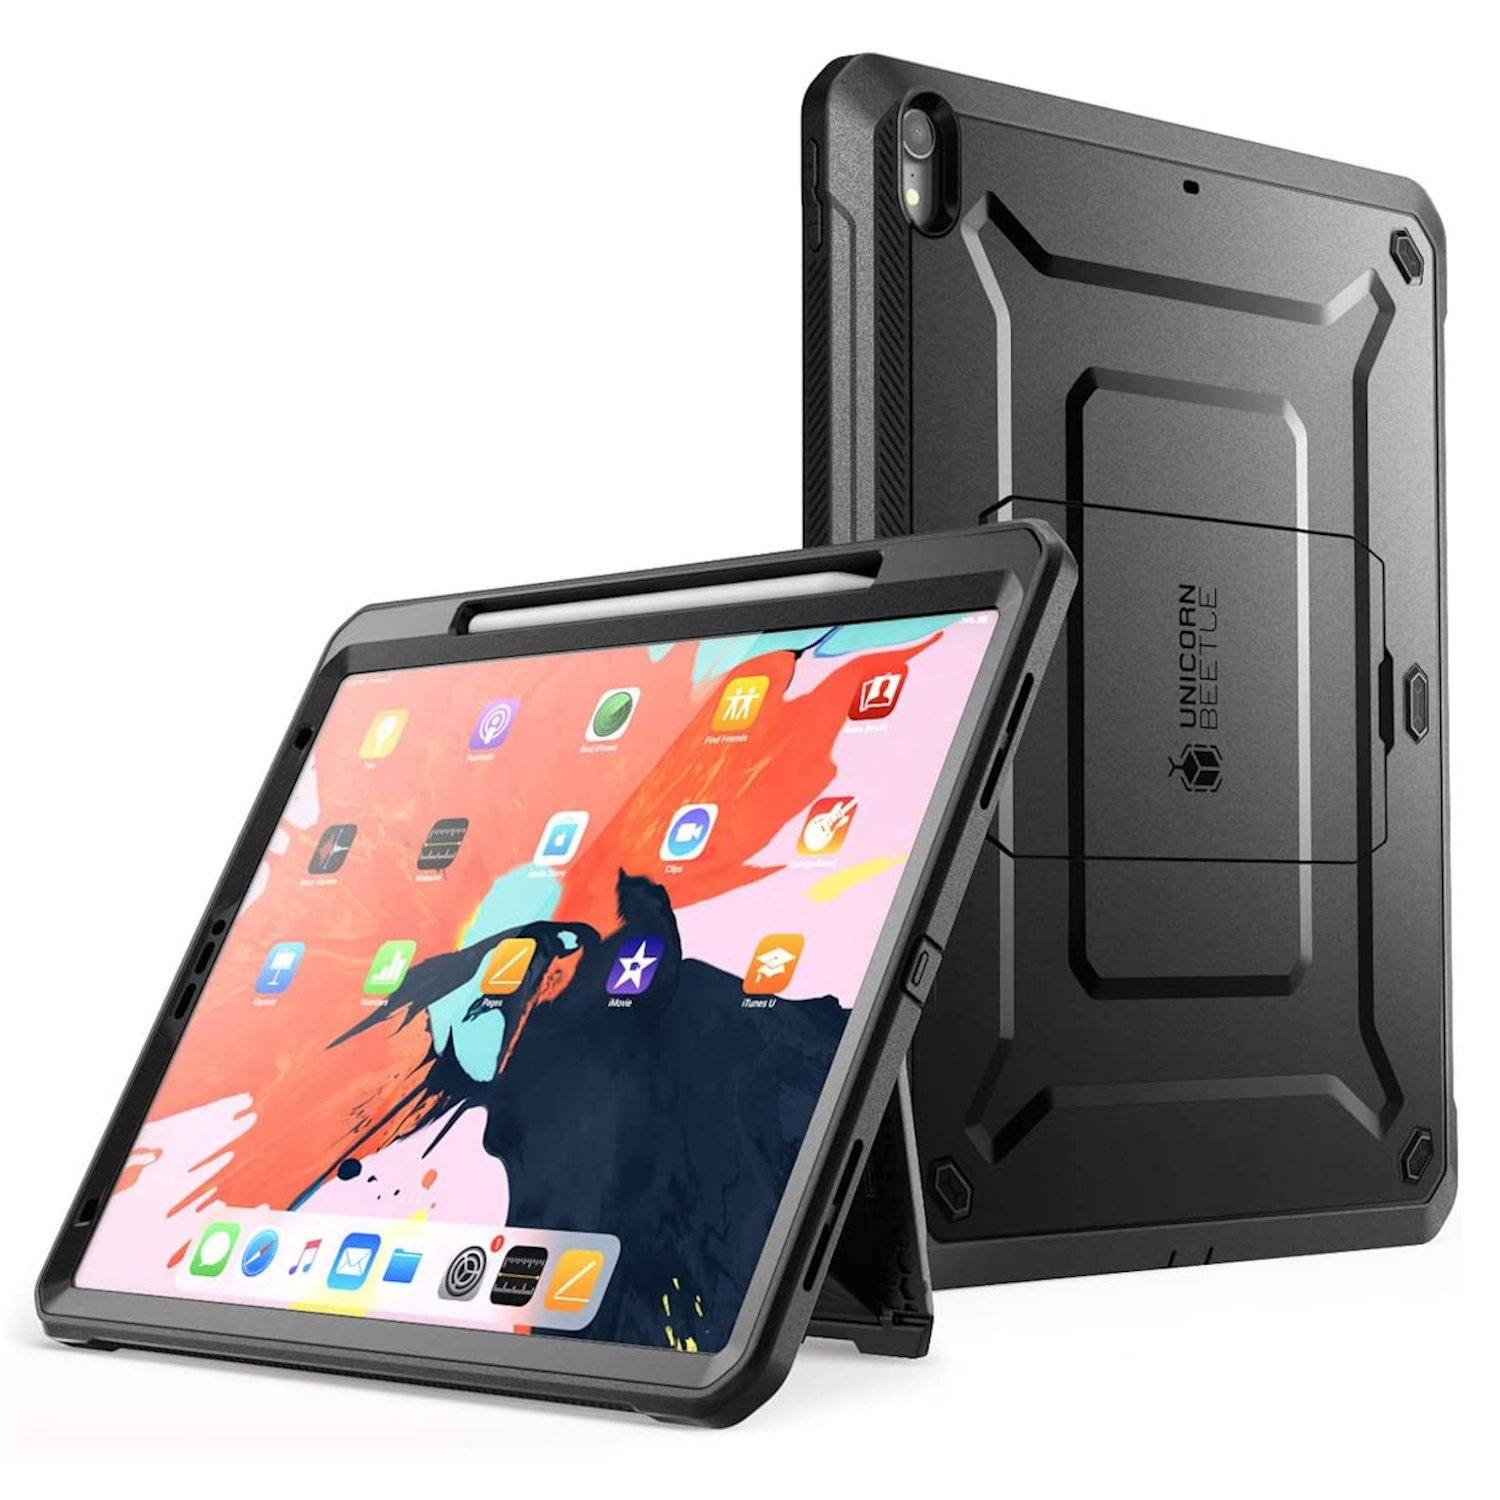 Supcase UB Pro Series Full-Body Rugged Case with Kickstand for iPad Pro 12.9"(2018)(With Pencil Holder), Black iPad Case Supcase Black 